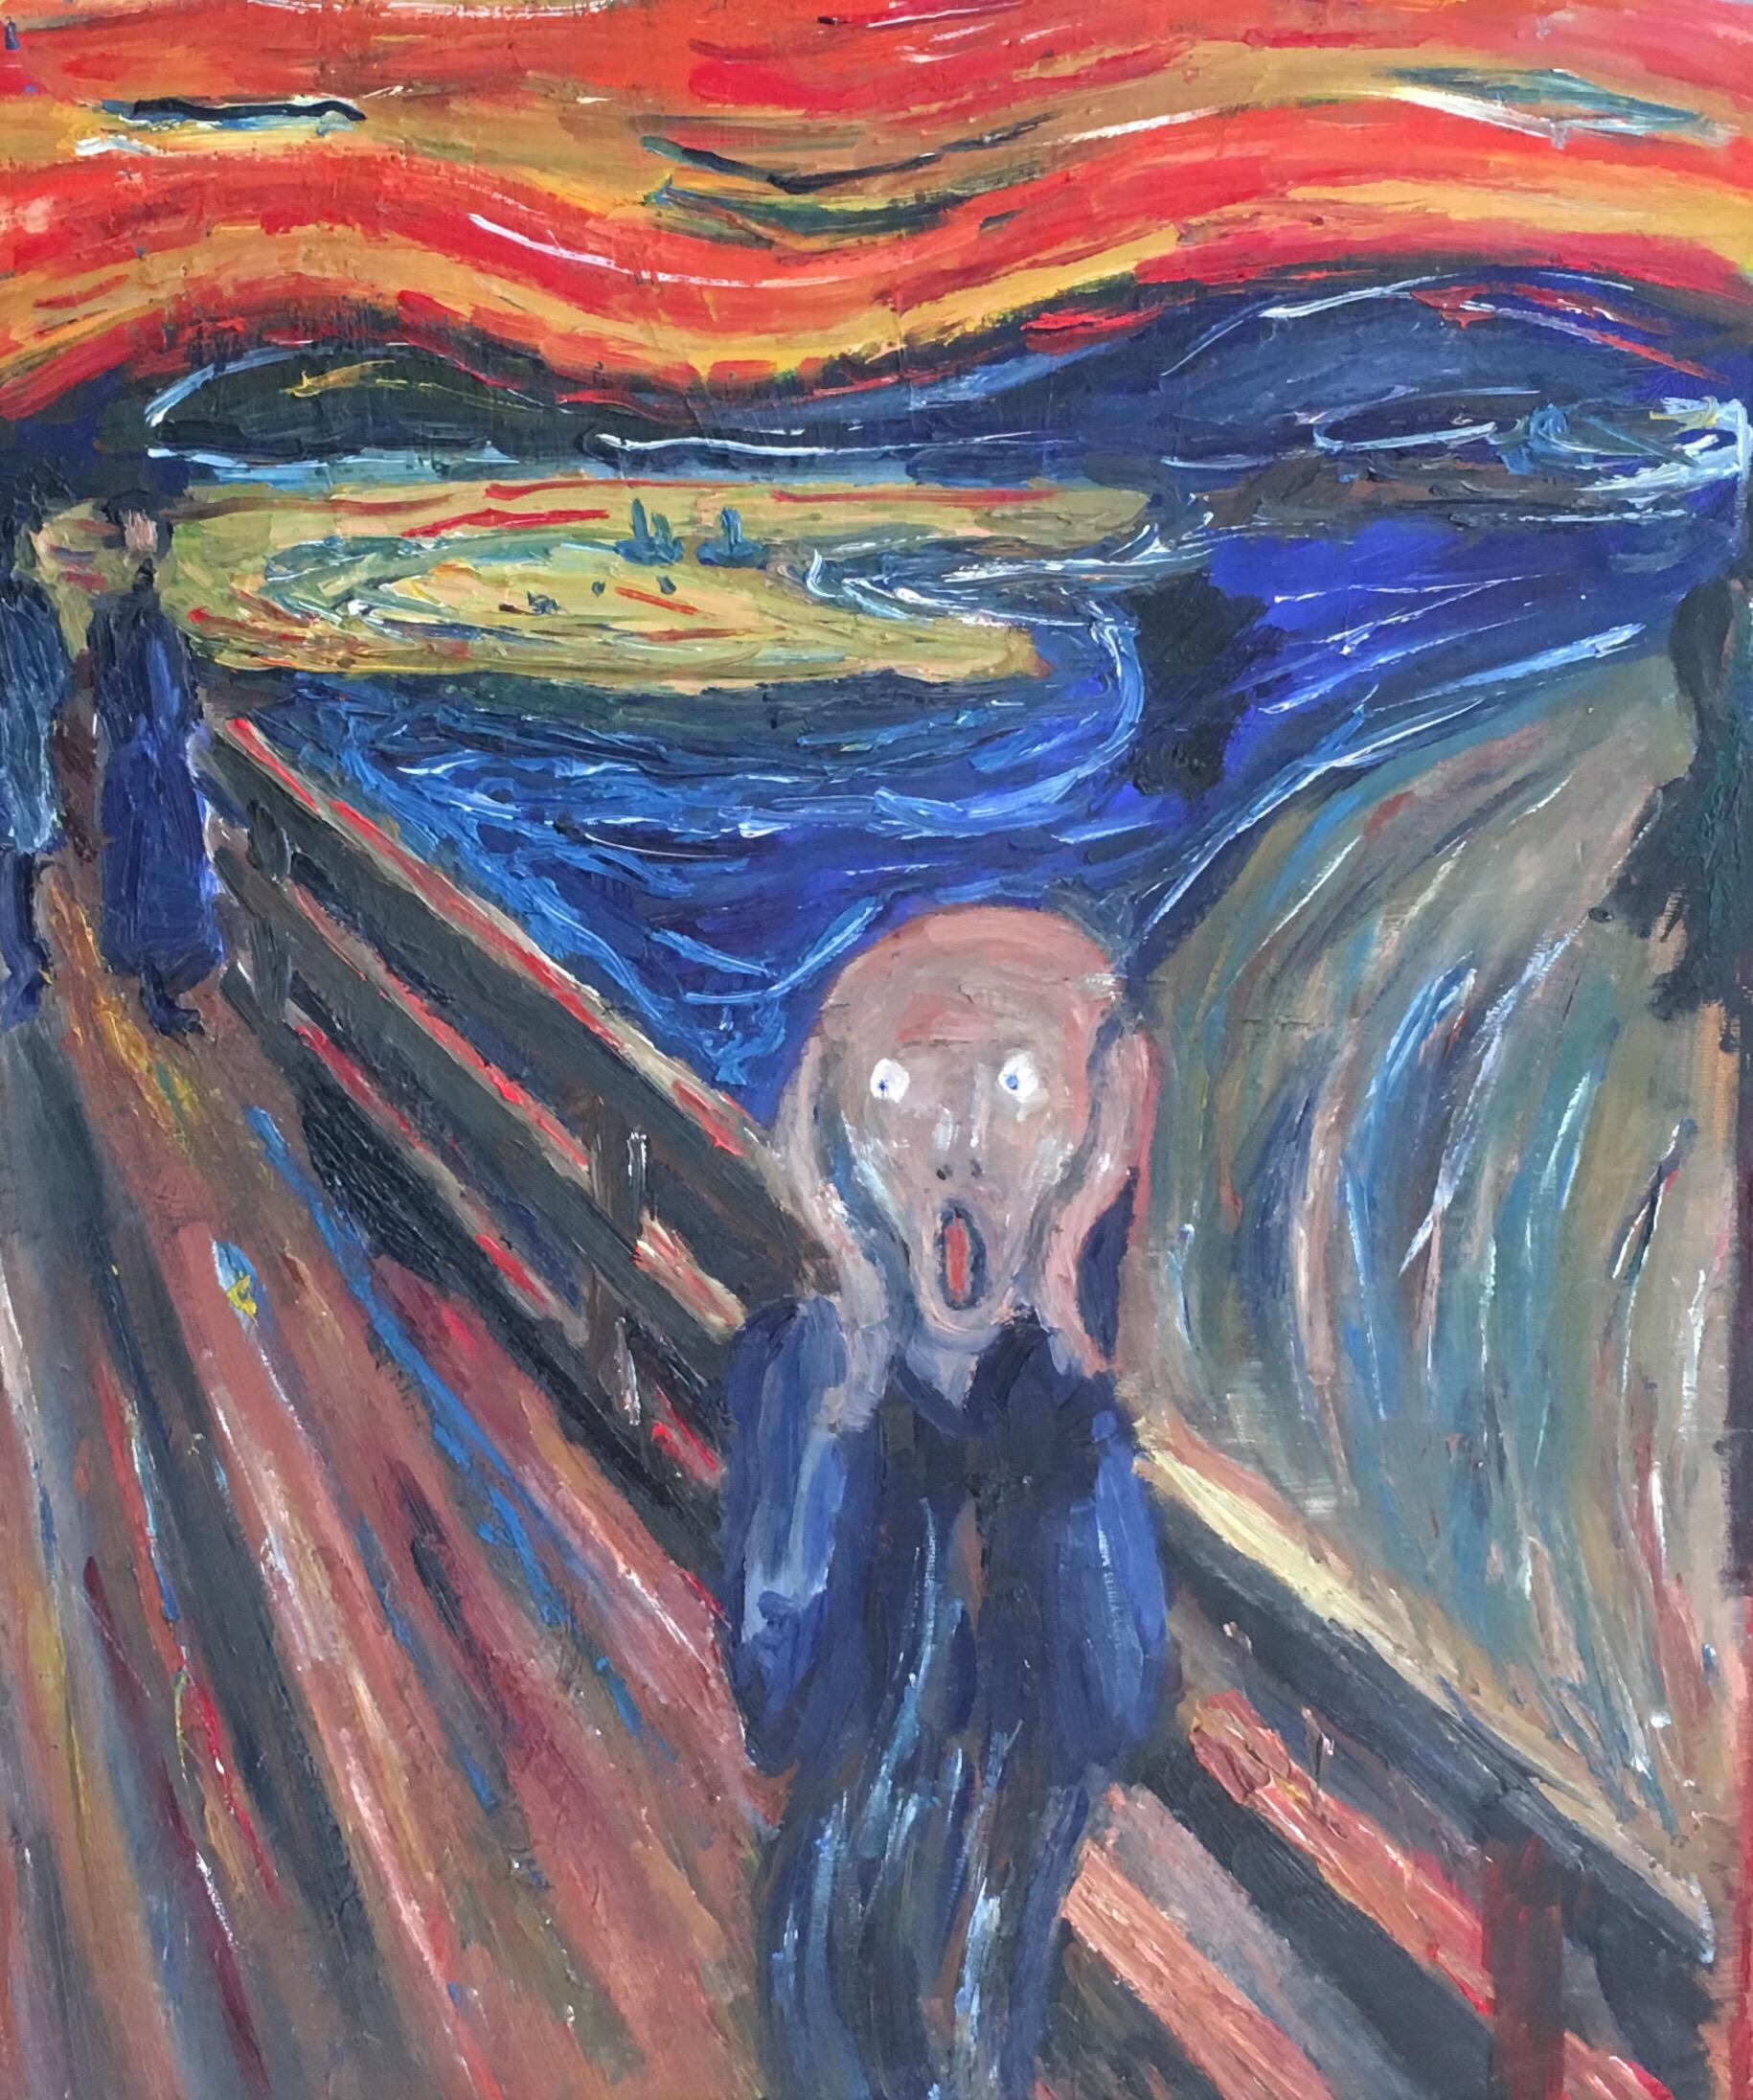 (After) Edvard Munch Portrait Painting - The Scream - vintage oil painting